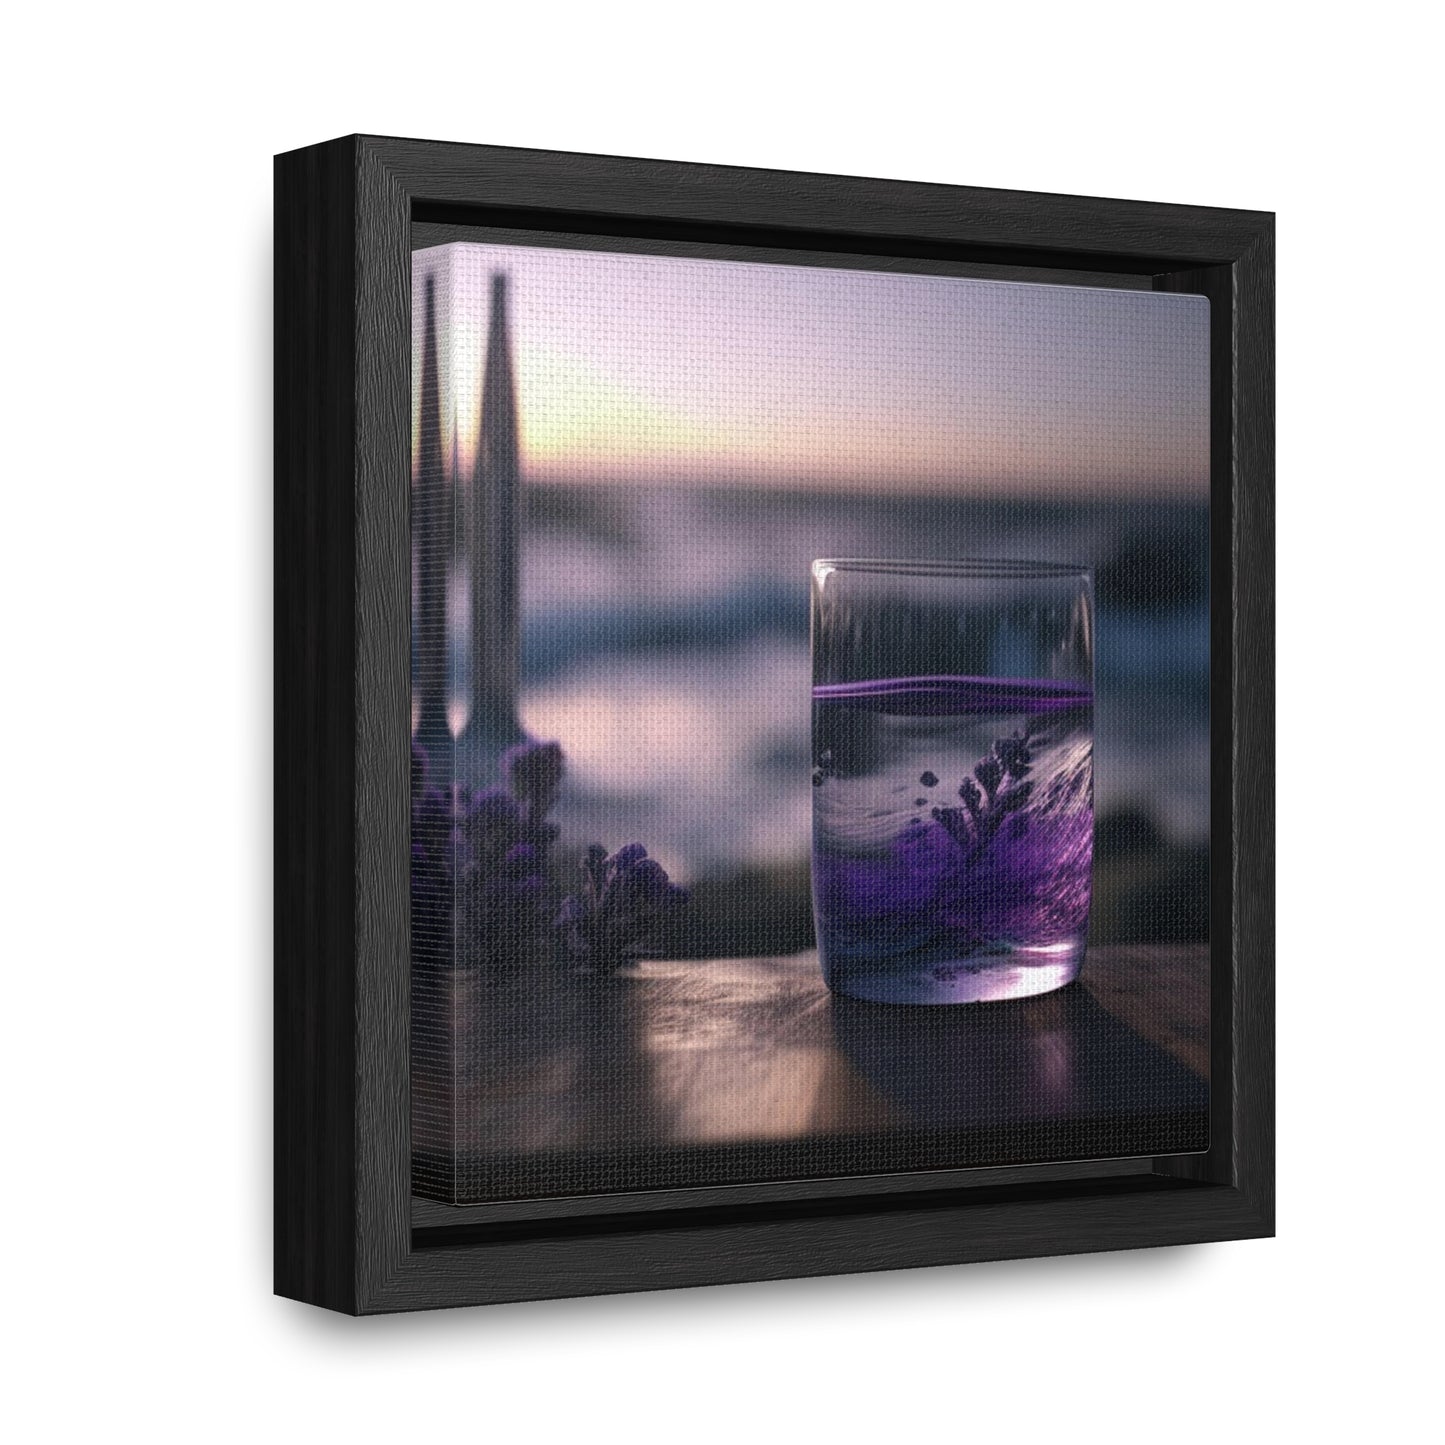 Gallery Canvas Wraps, Square Frame Lavender in a vase 4